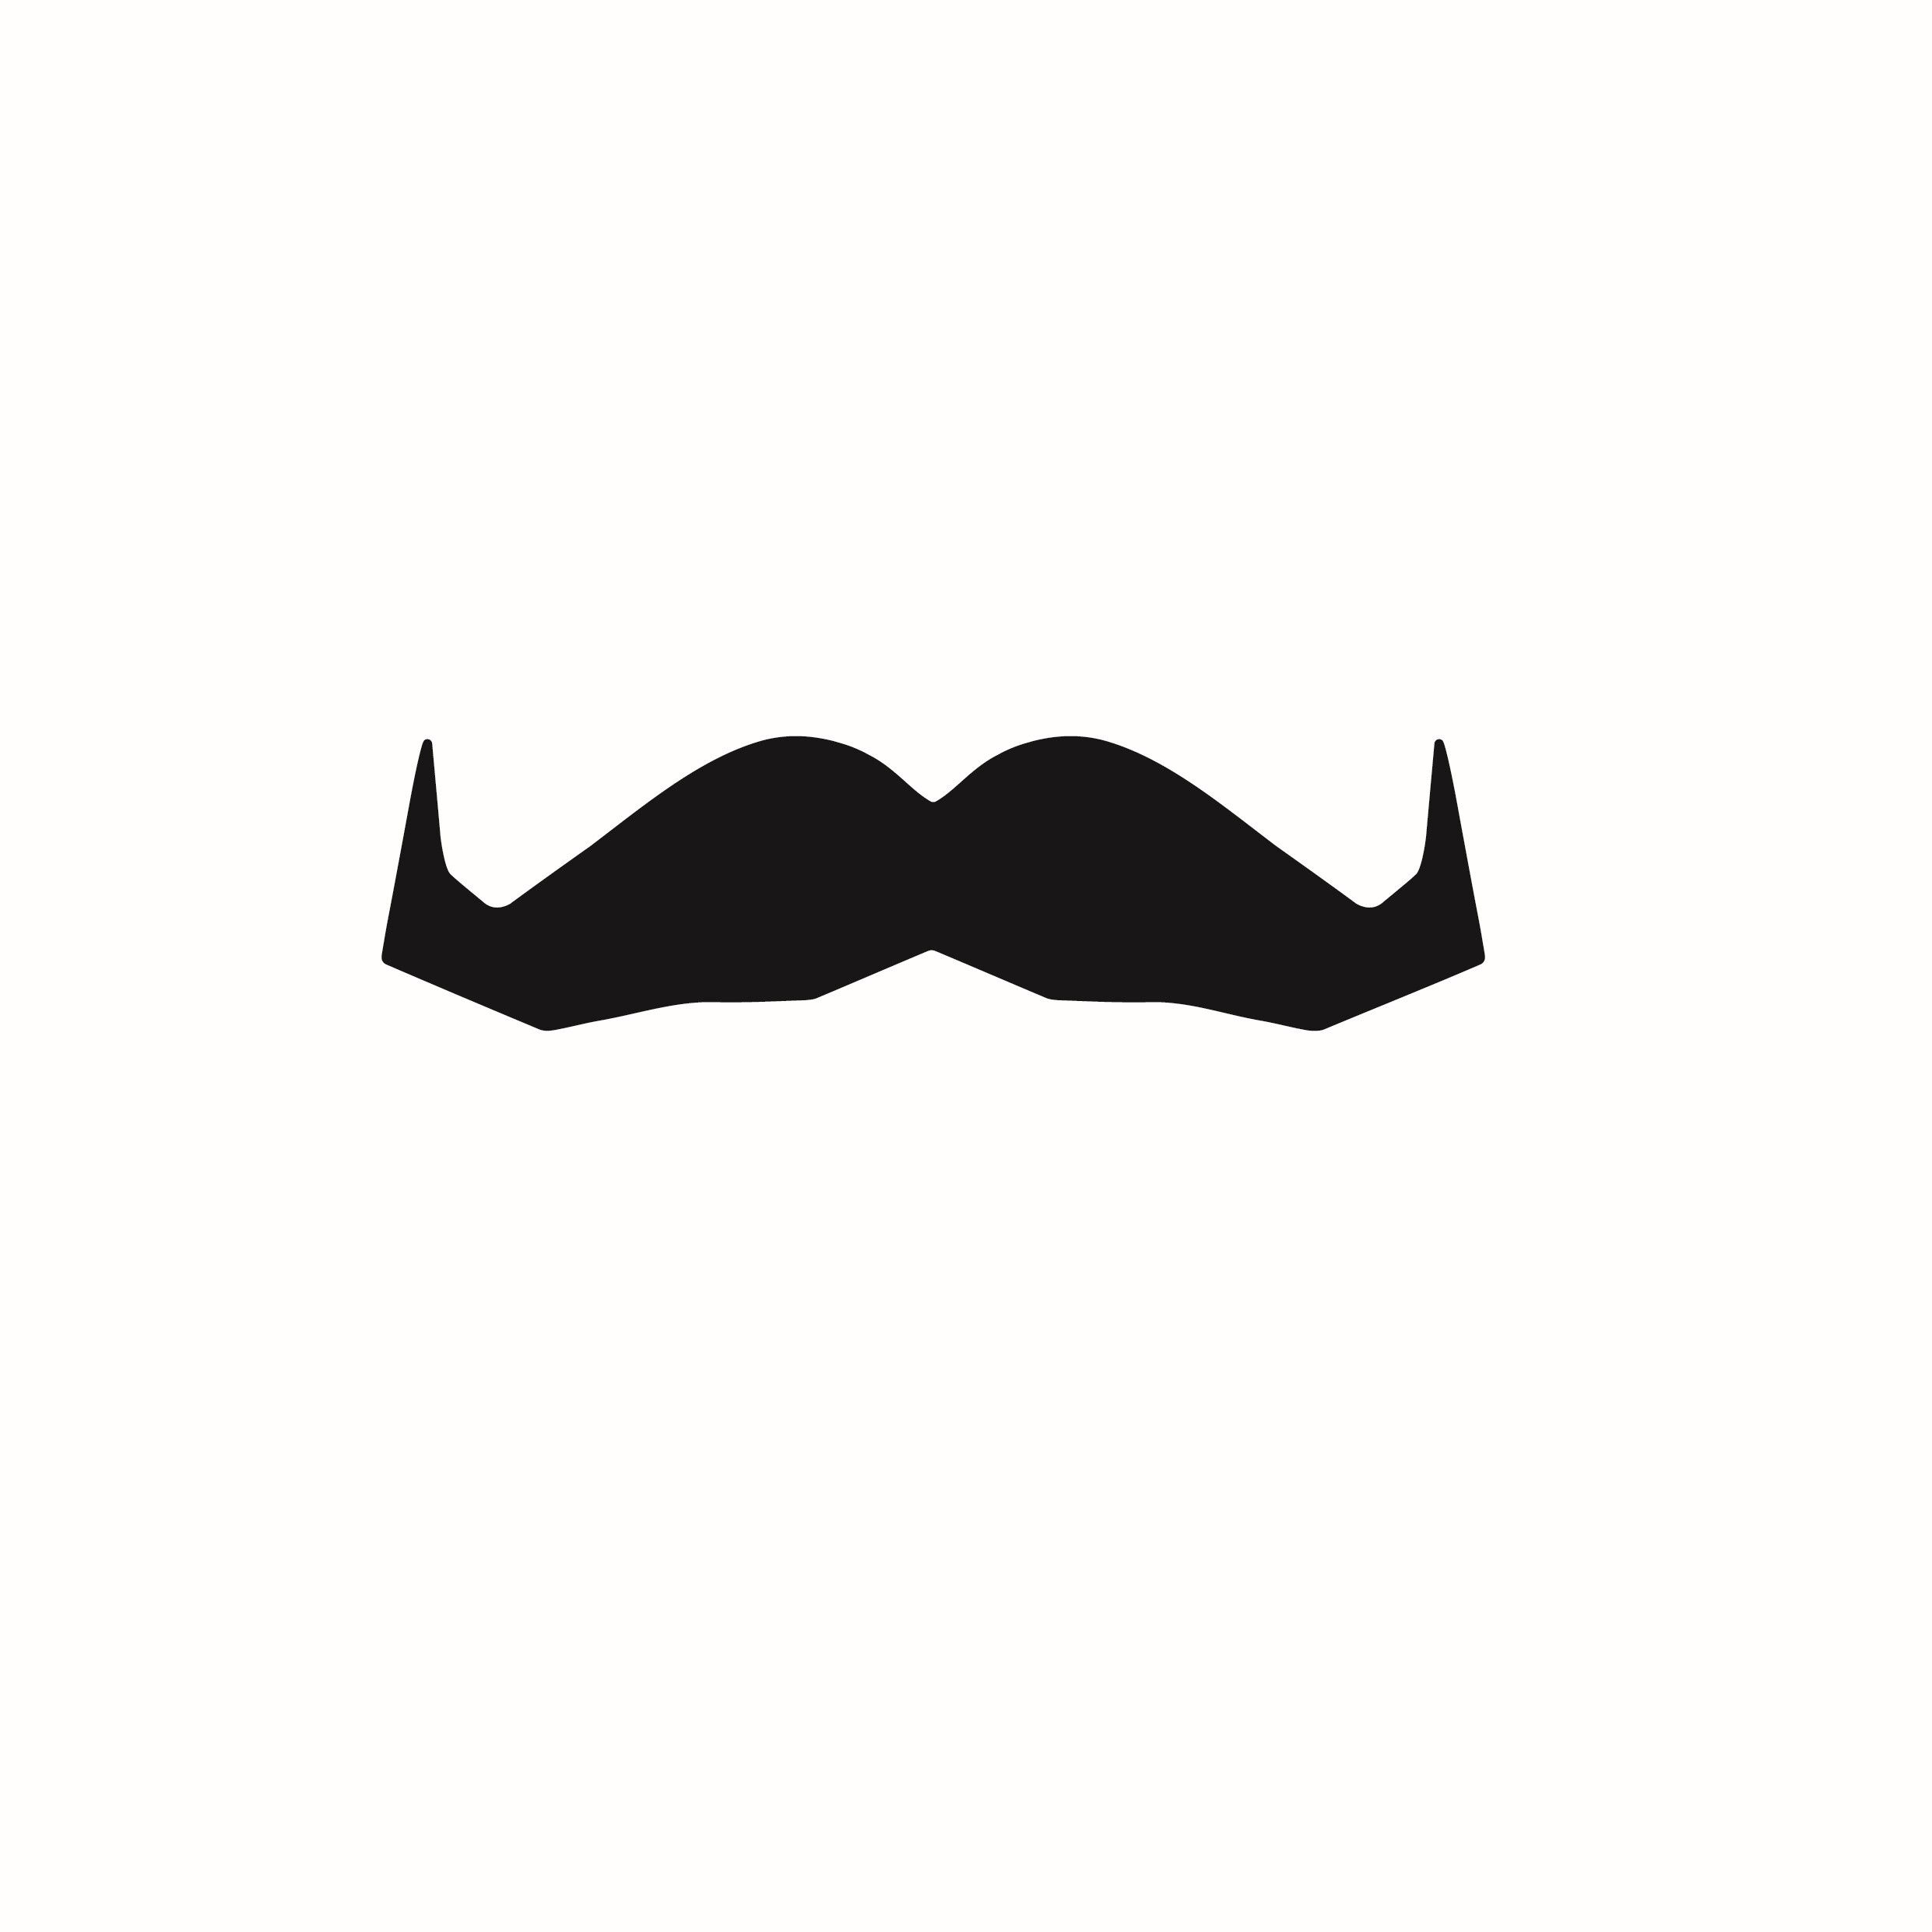 Ep 311: Movember Men’s Health Institute launch with Sarah Sternberg